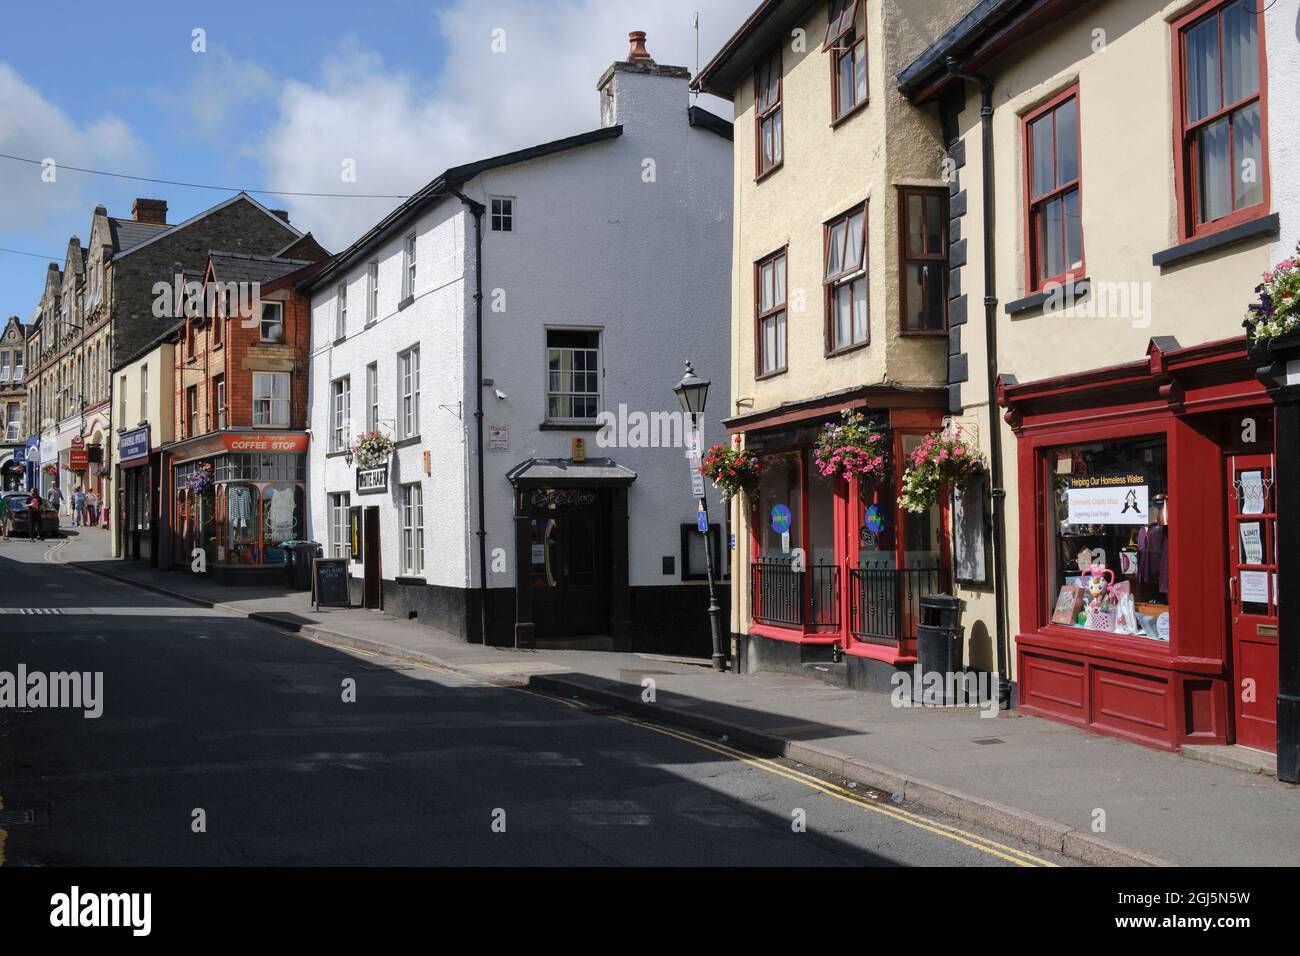 Shops in High Street, Builth Wells, Powys, Wales Stock Photo